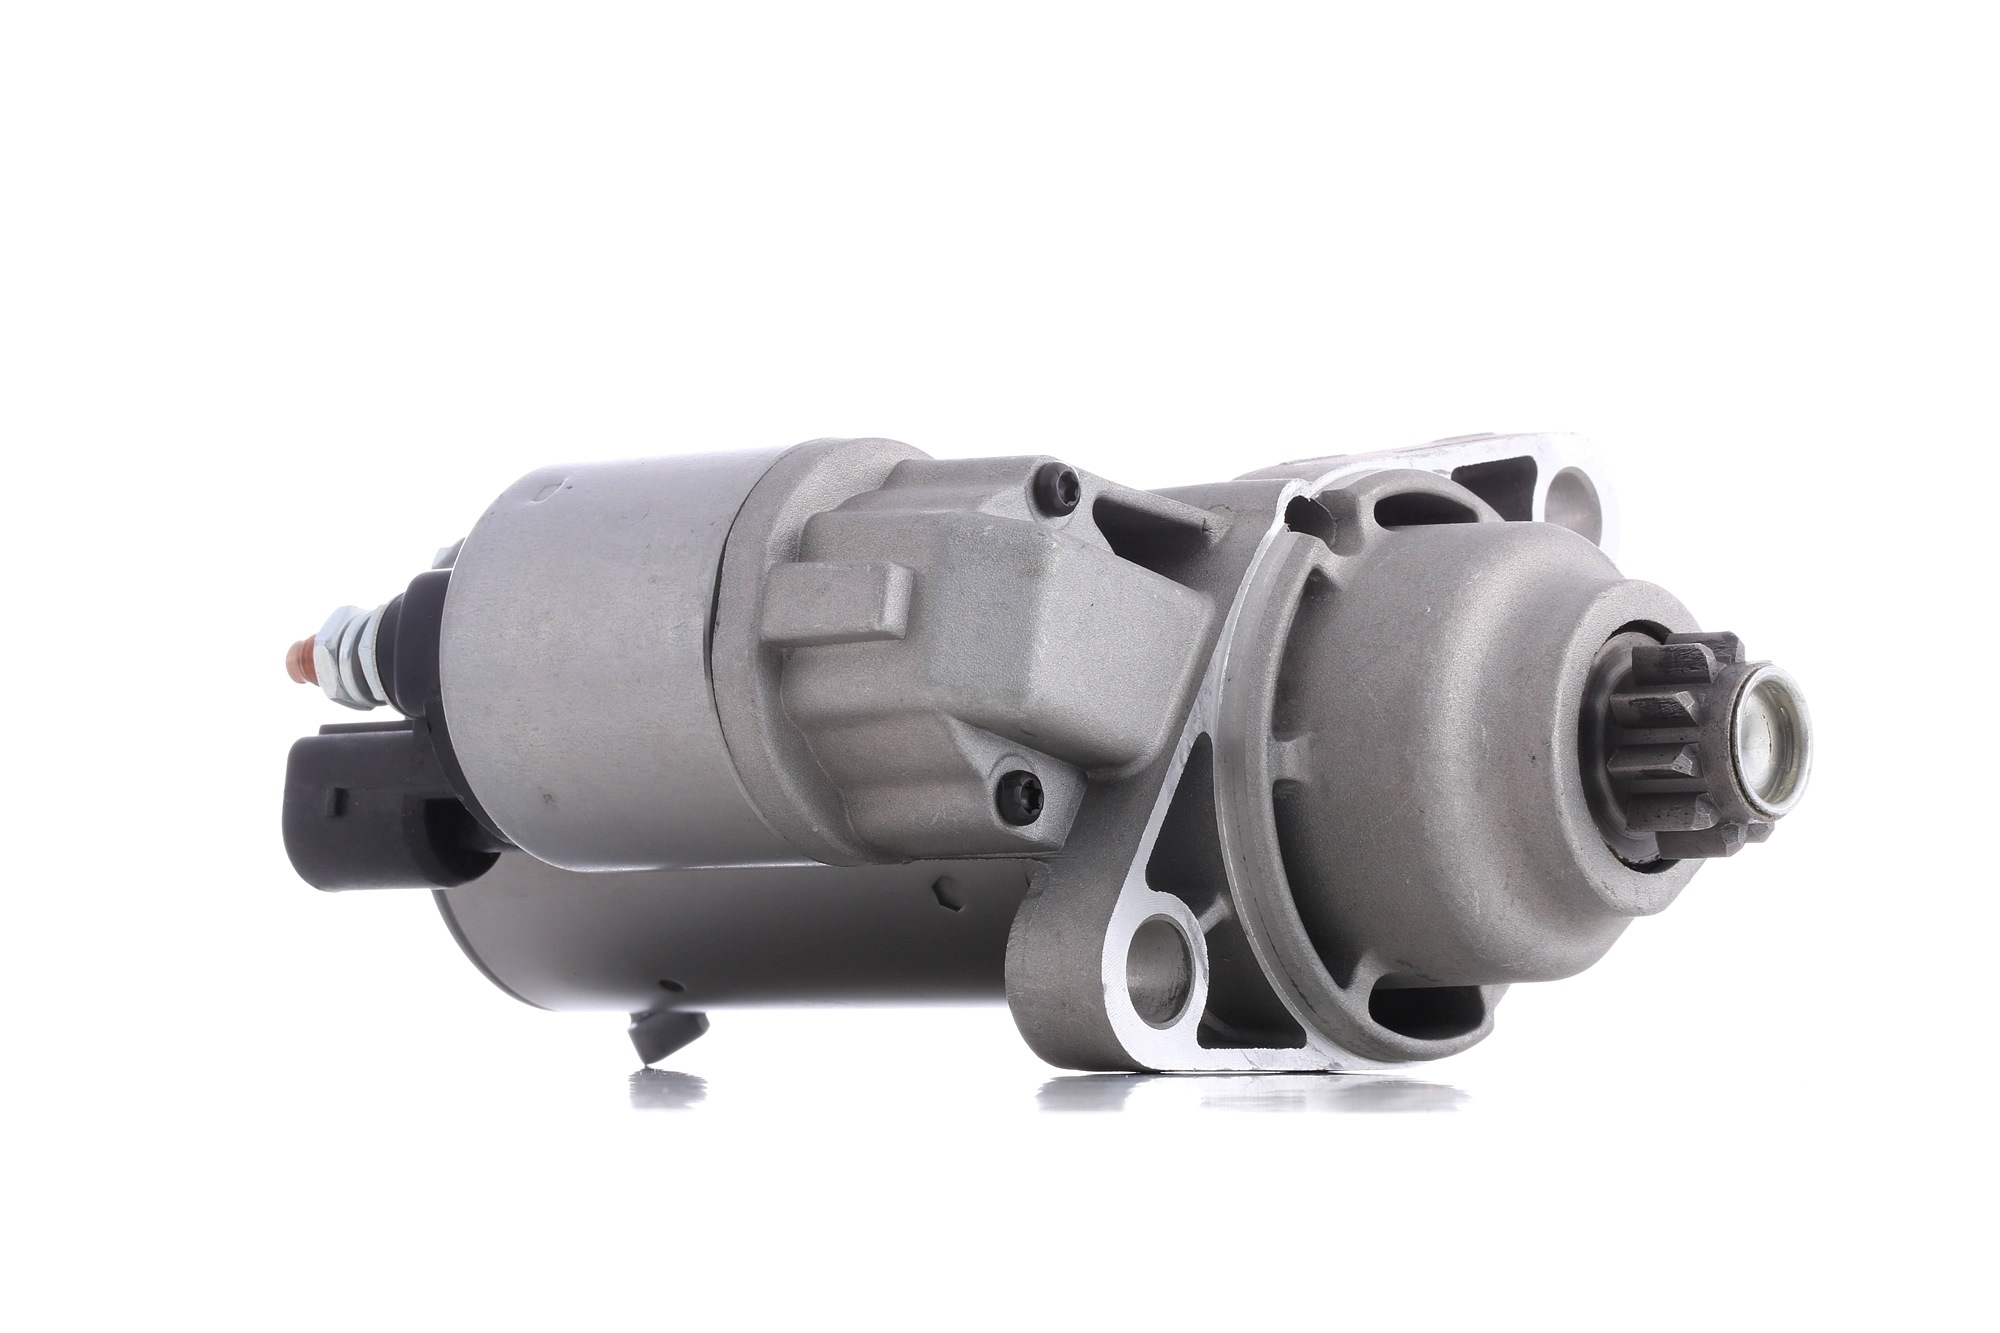 RIDEX 2S0162 Starter motor 12V, 1kW, Number of Teeth: 10, with 50(Jet) clamp, Ø 76 mm